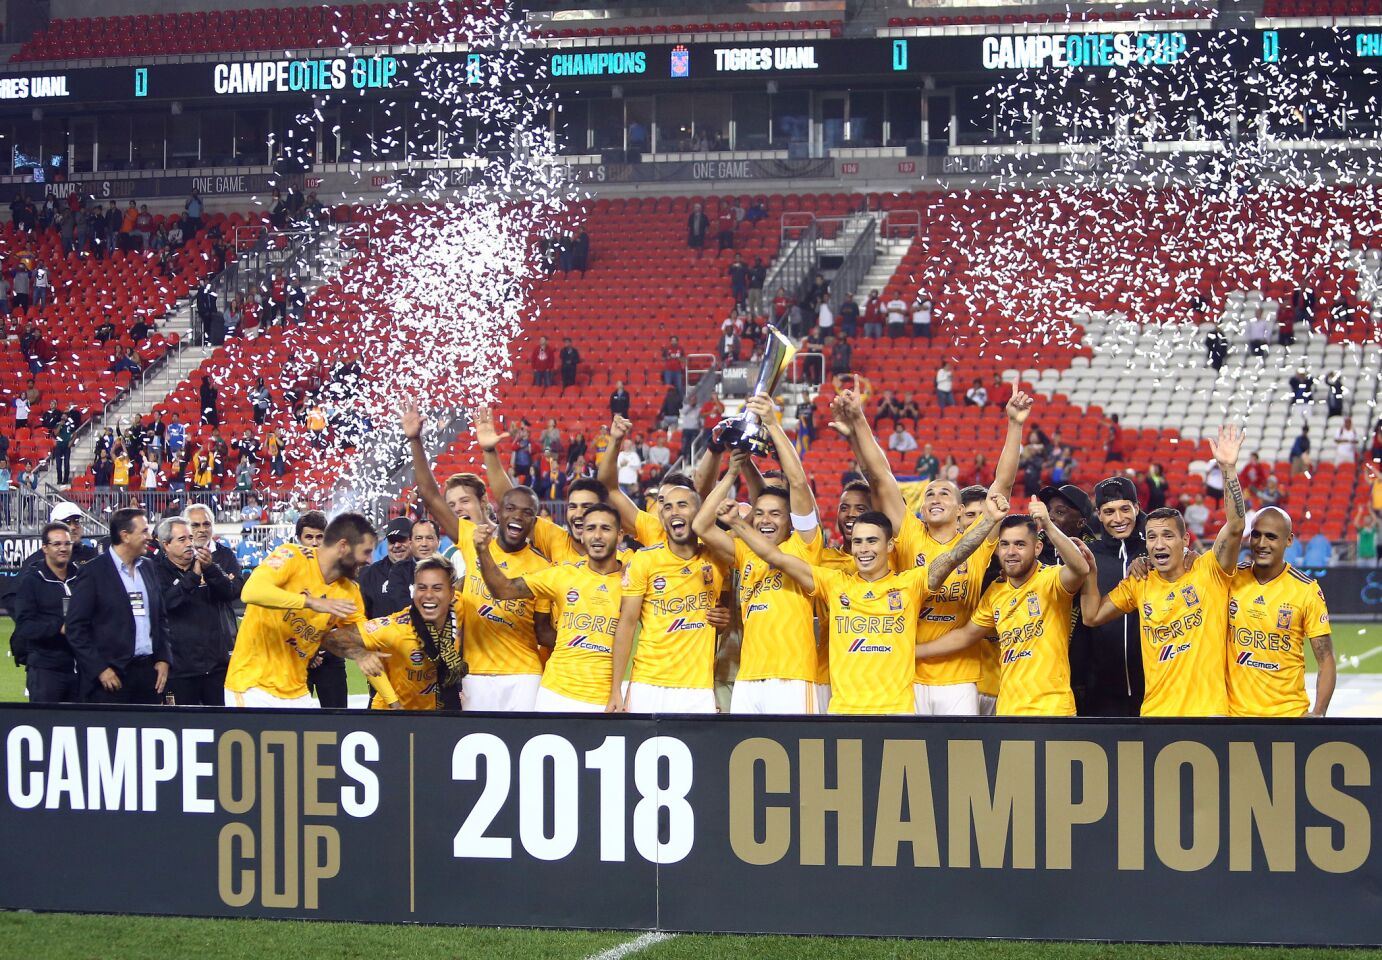 TORONTO, ON - SEPTEMBER 19: Juninho #3 of Tigres UANL lifts the 2018 Campeones Cup Final trophy after victory against Toronto FC at BMO Field on September 19, 2018 in Toronto, Canada. (Photo by Vaughn Ridley/Getty Images) ** OUTS - ELSENT, FPG, CM - OUTS * NM, PH, VA if sourced by CT, LA or MoD **